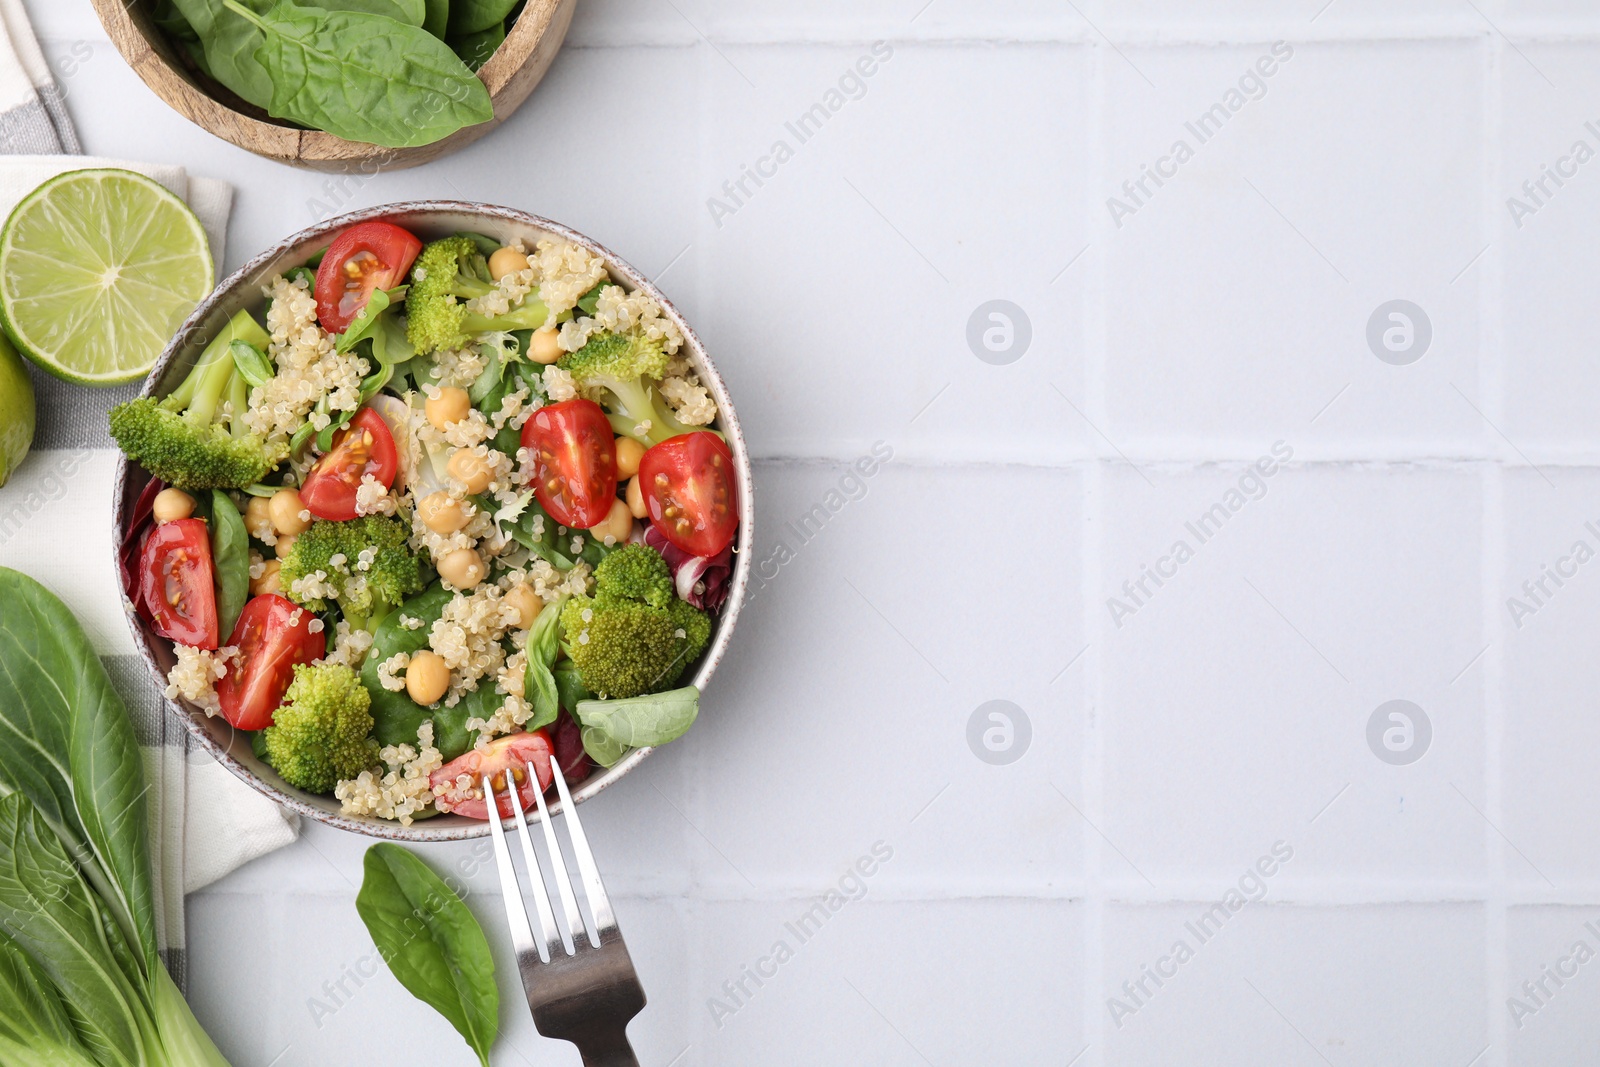 Photo of Healthy meal. Tasty salad with quinoa, chickpeas and vegetables served on white tiled table, flat lay with space for text